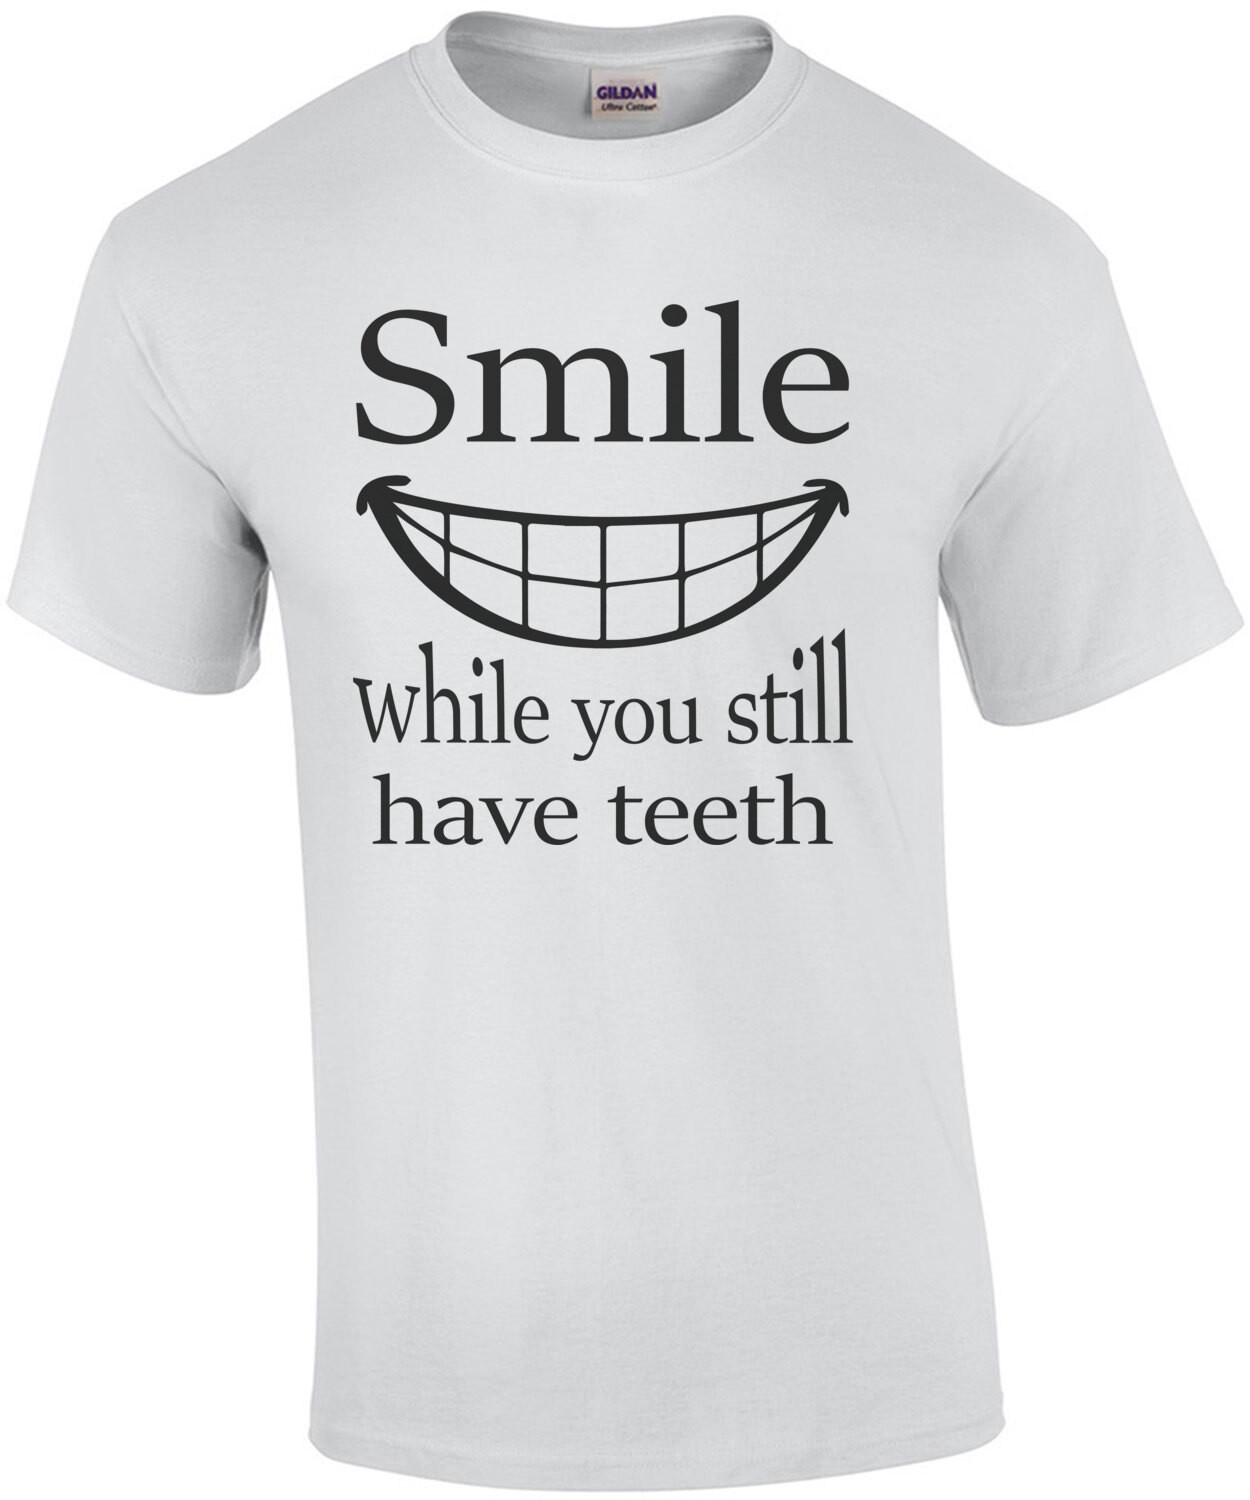 Smile While You Still Have Teeth Shirt